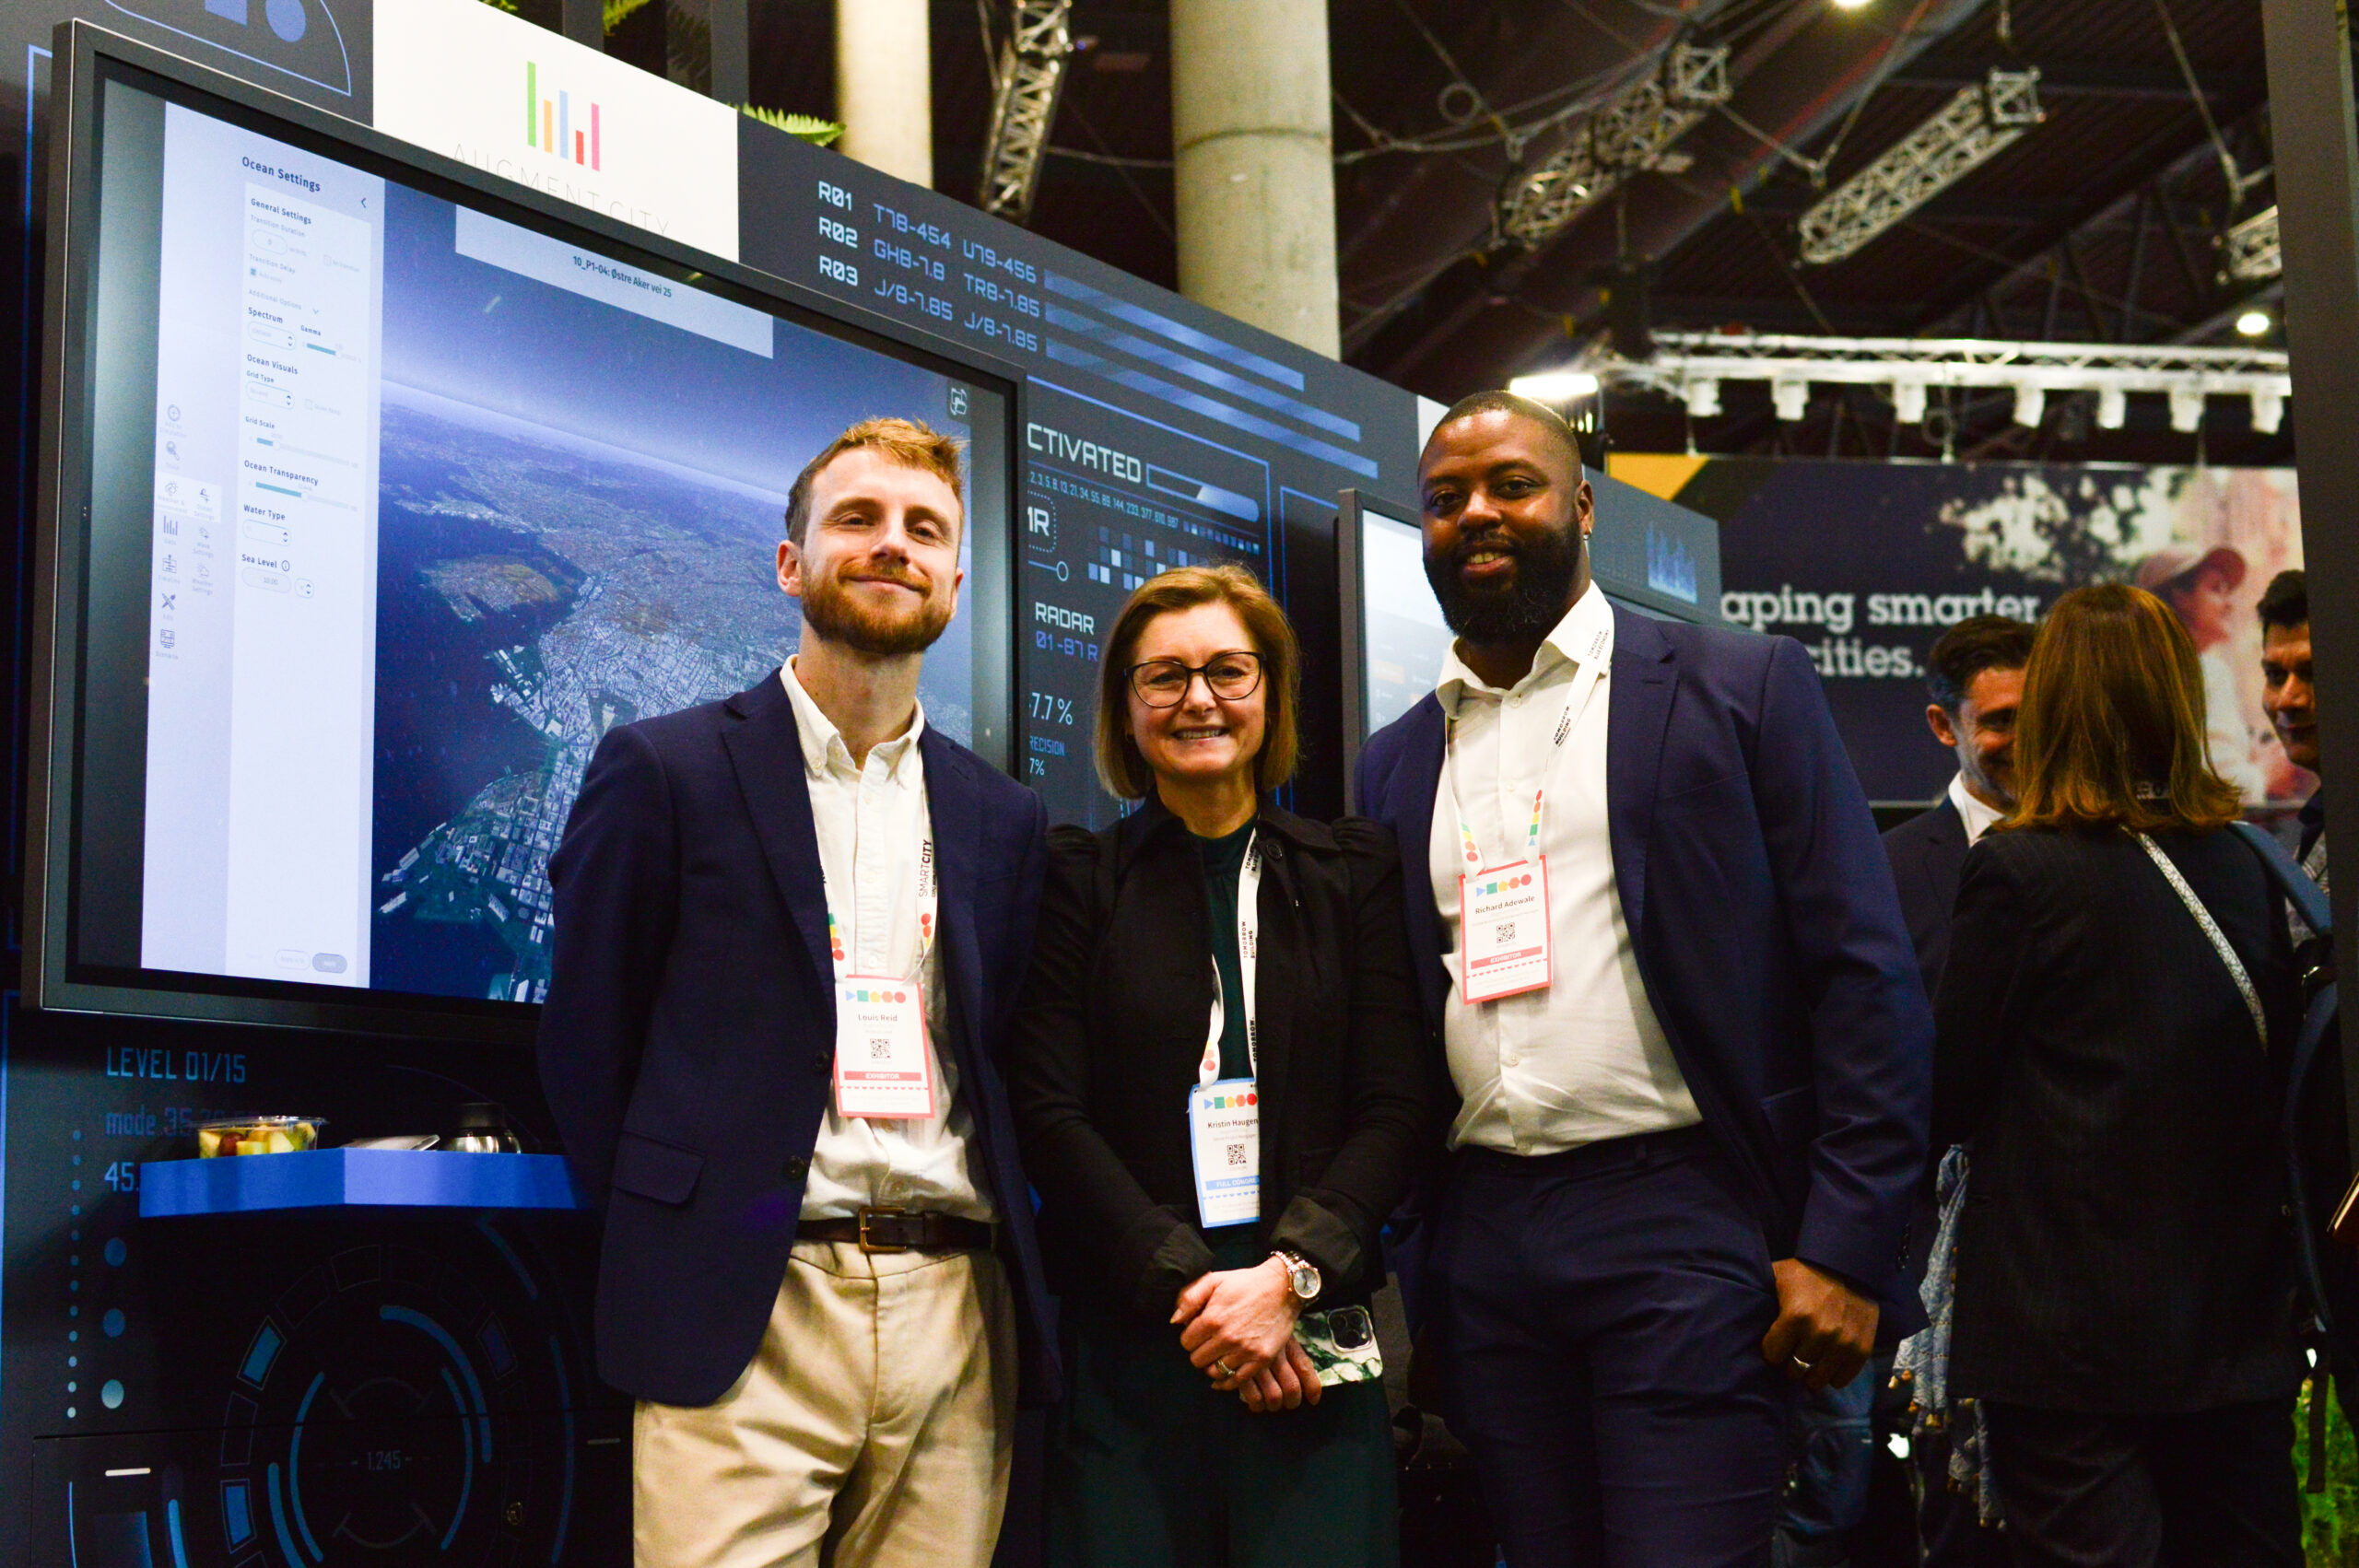 RESIST Project showcases digital twin technology at Smart City Expo World Congress in Barcelona 